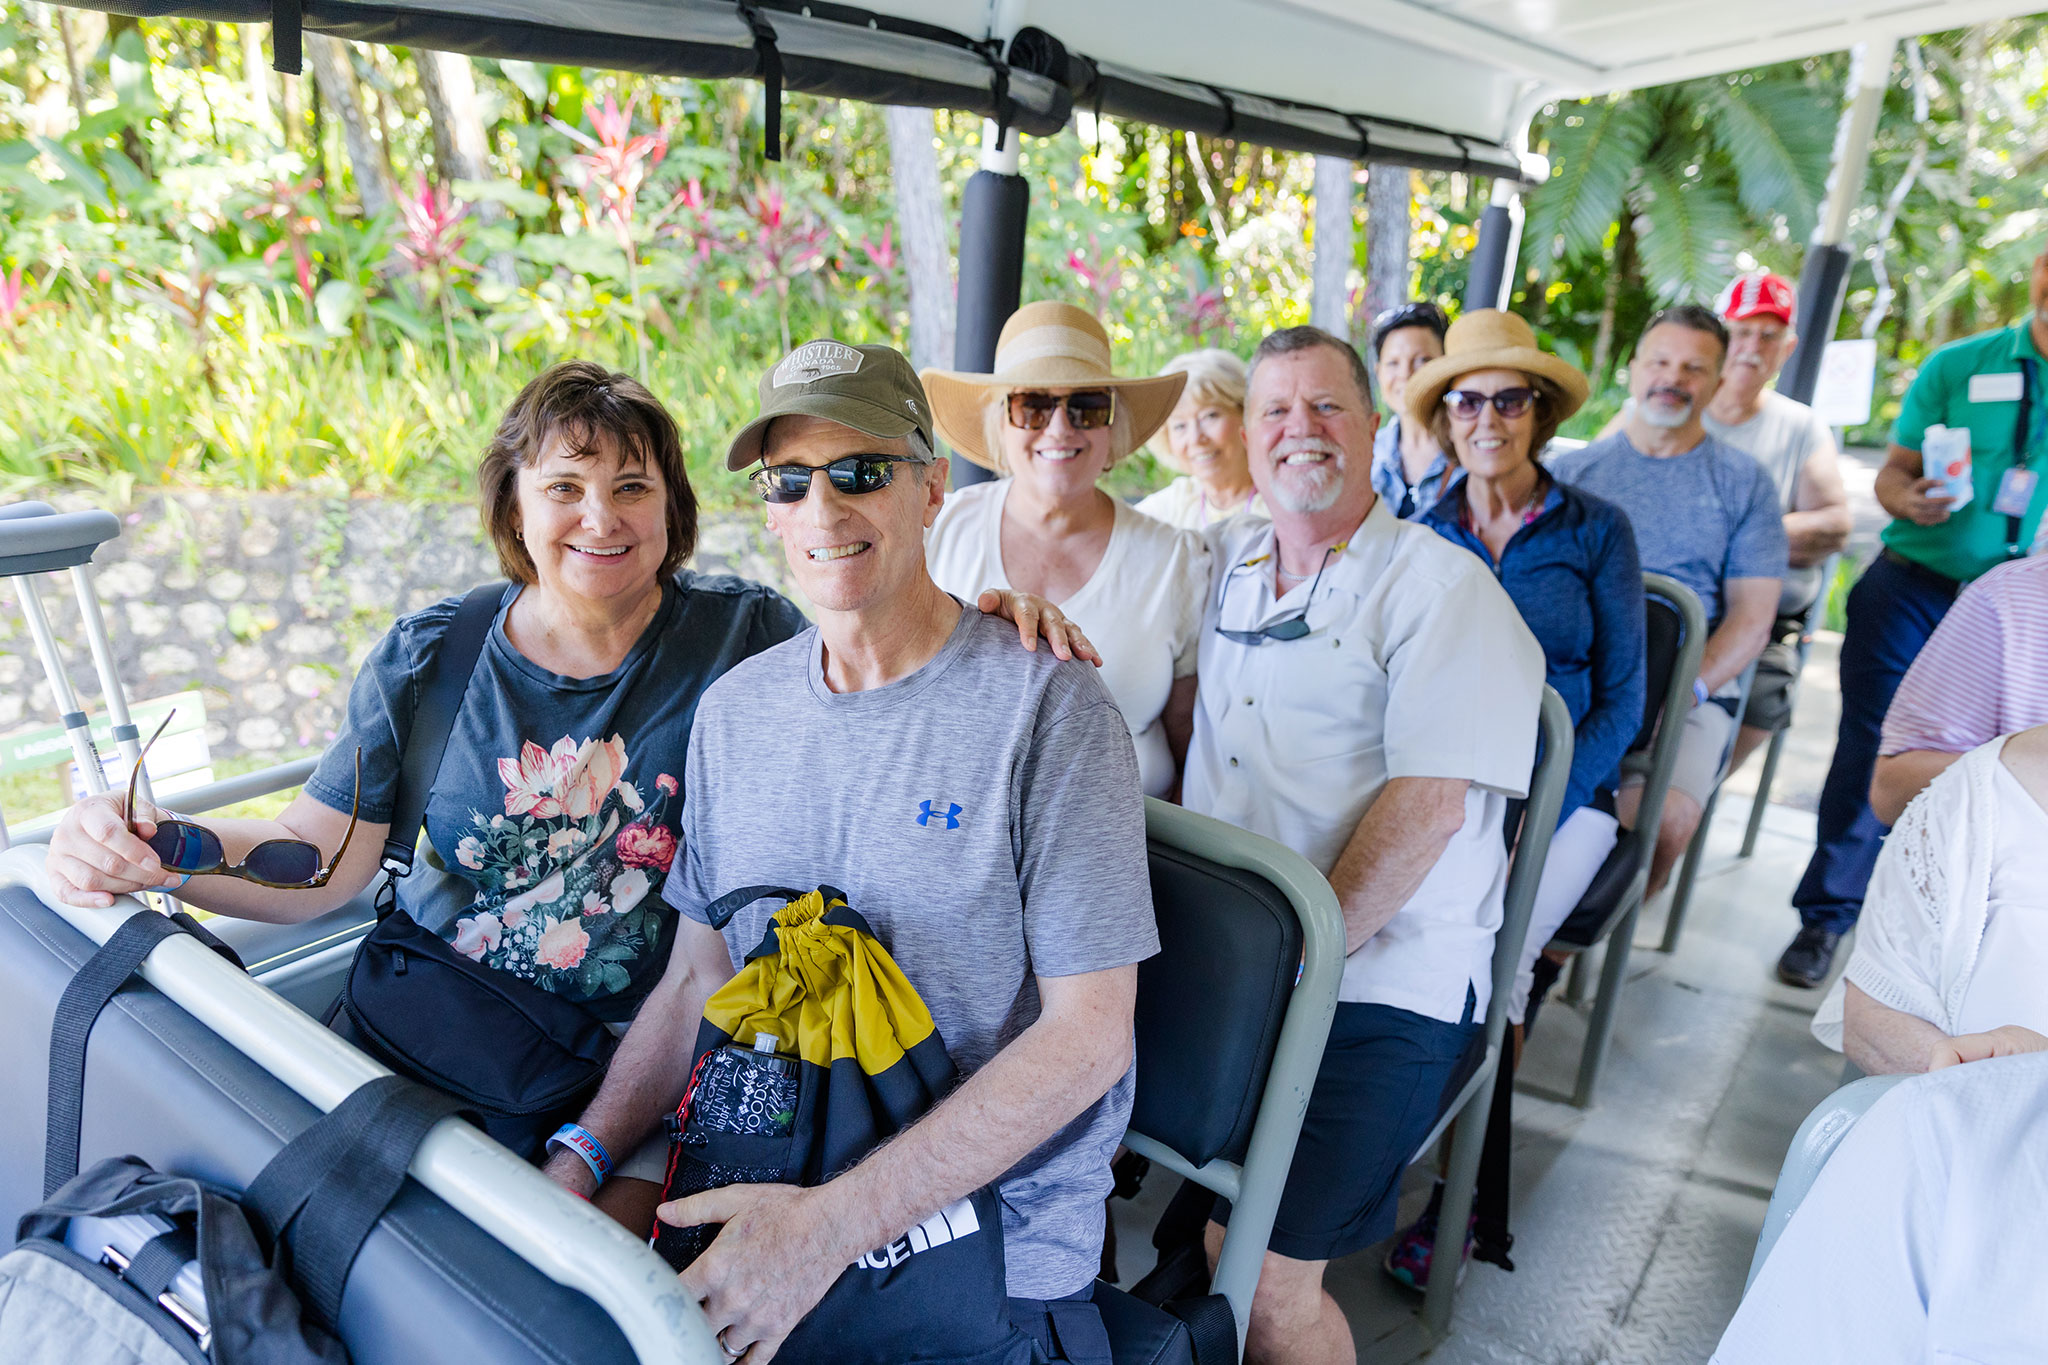 A group of travelers seated in a tour bus, smiling and enjoying the journey, with vibrant tropical plants visible in the background.